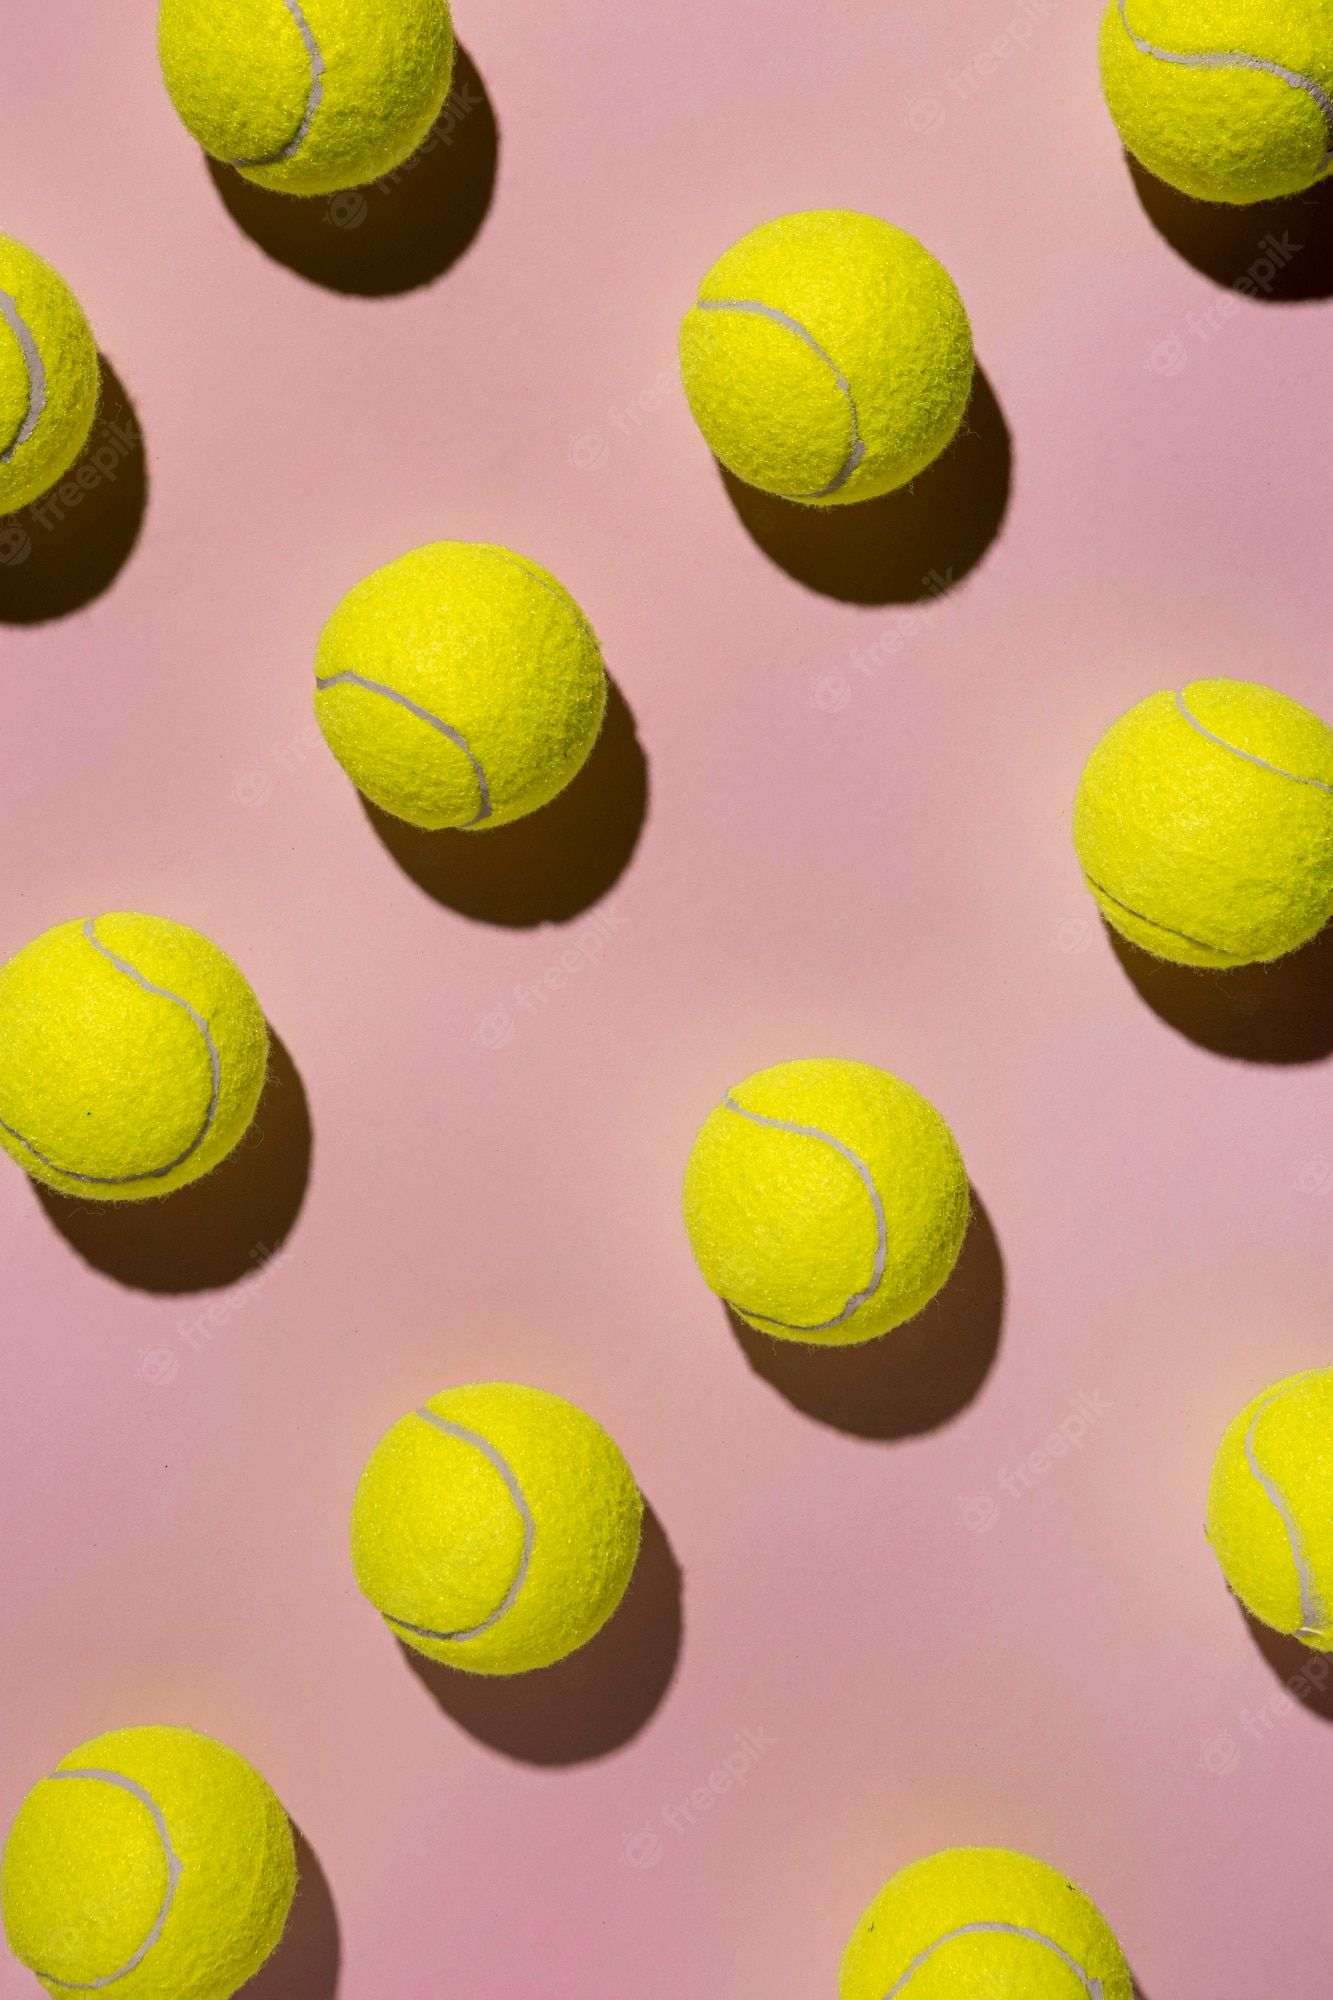 A bunch of tennis balls on pink background - Tennis